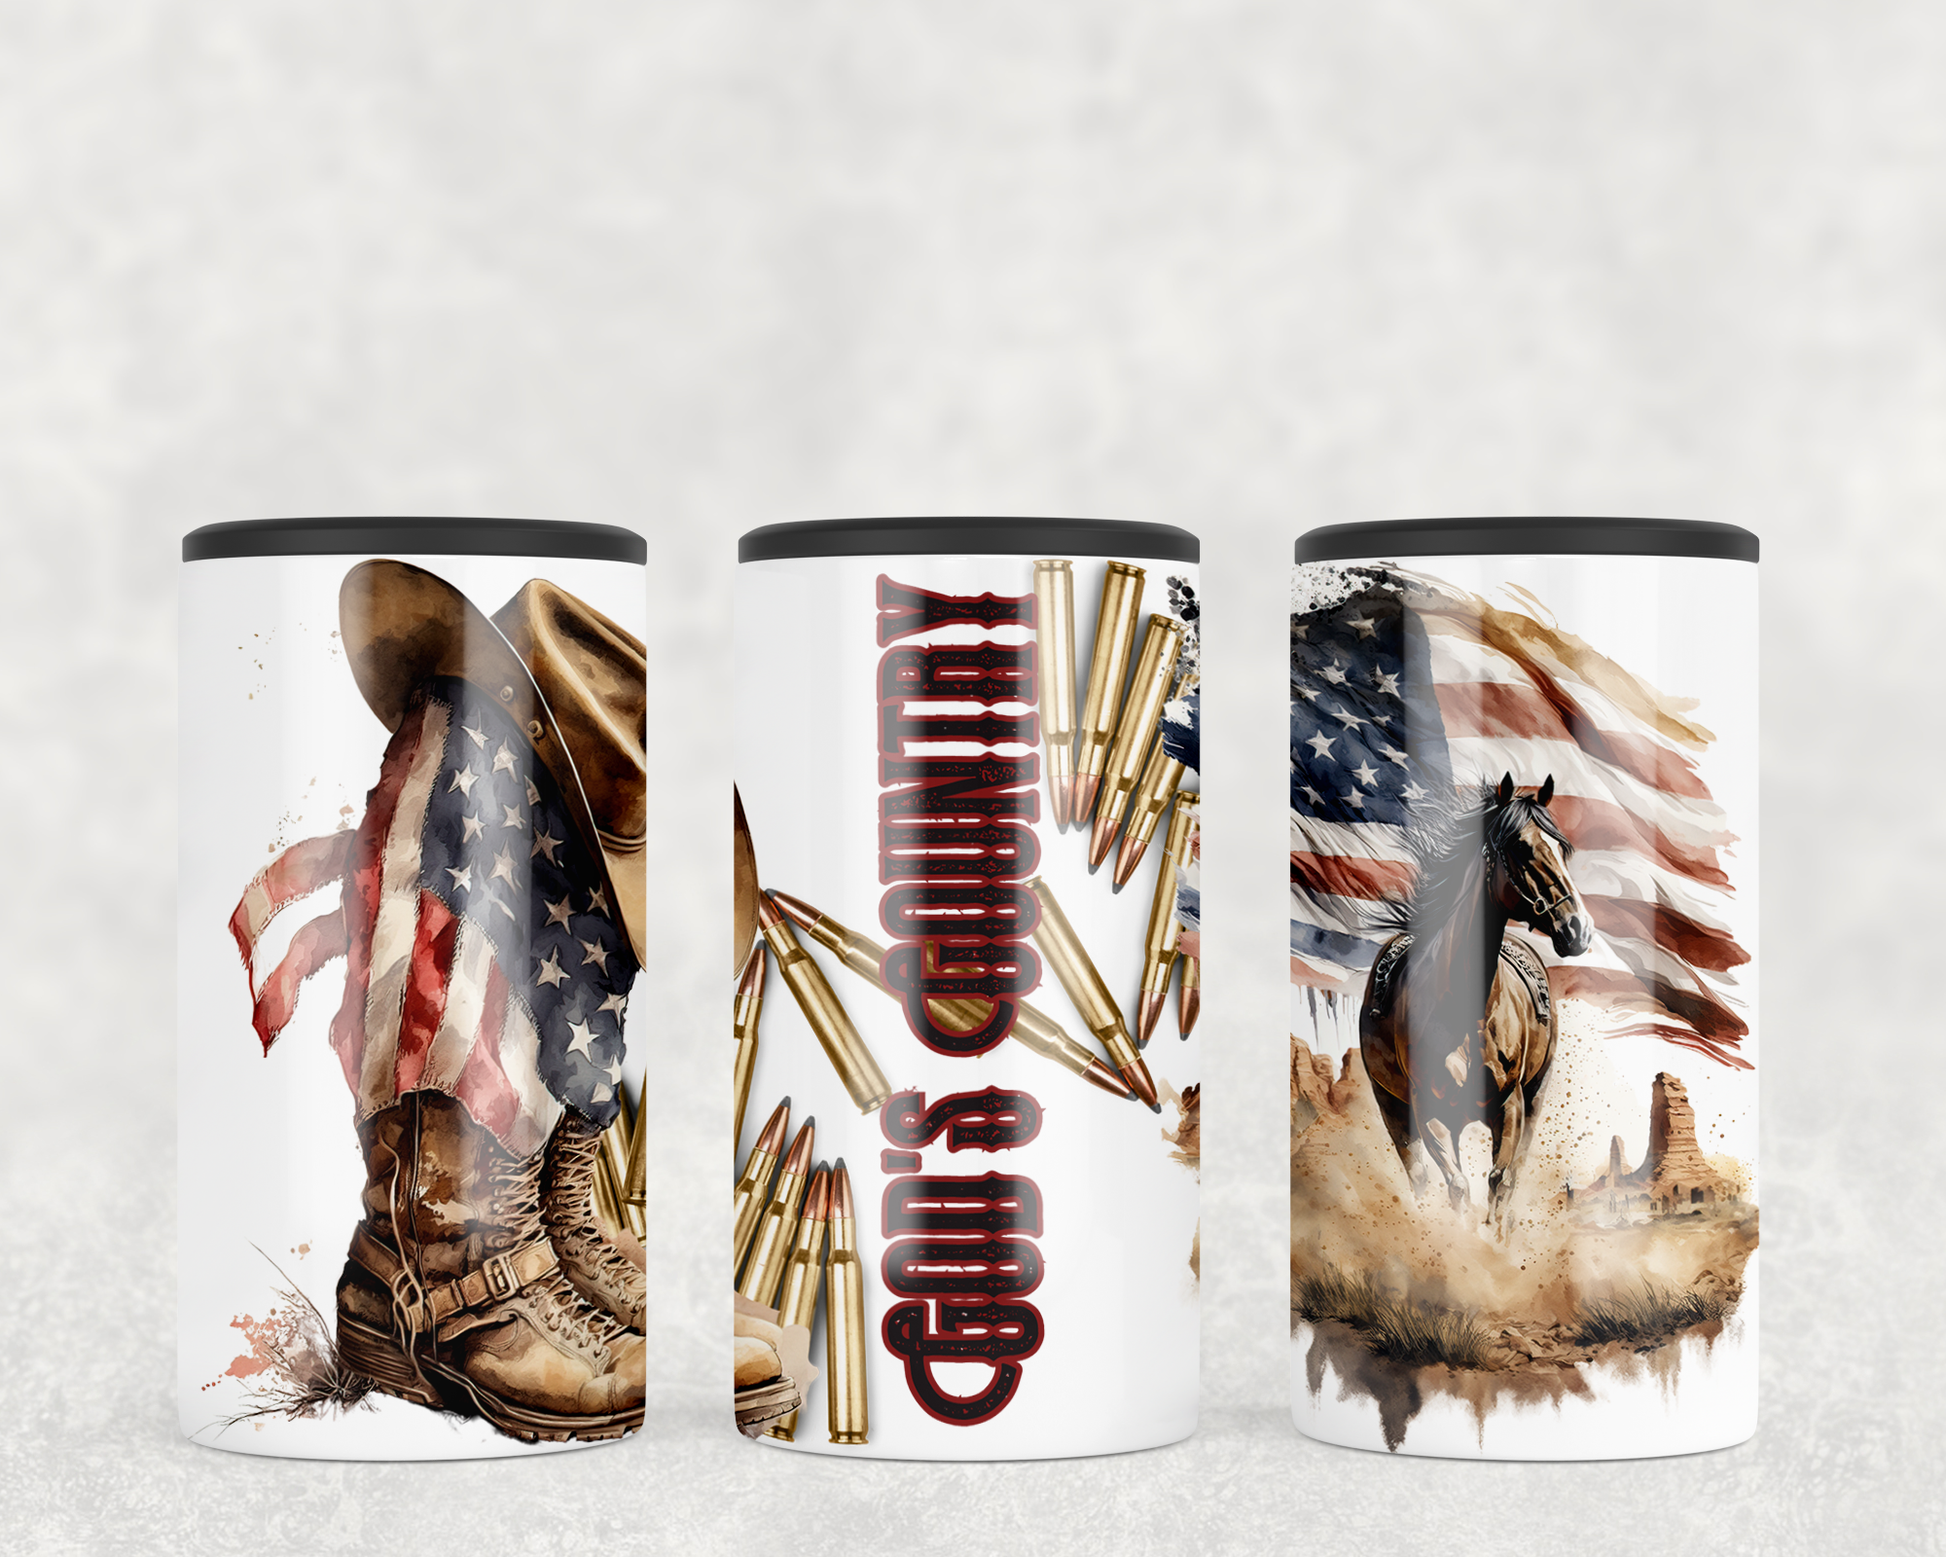 God's country 12 oz. 4-in-1 slim can cooler with a horse, U.S. flag, cowboy hat, bullets on image.